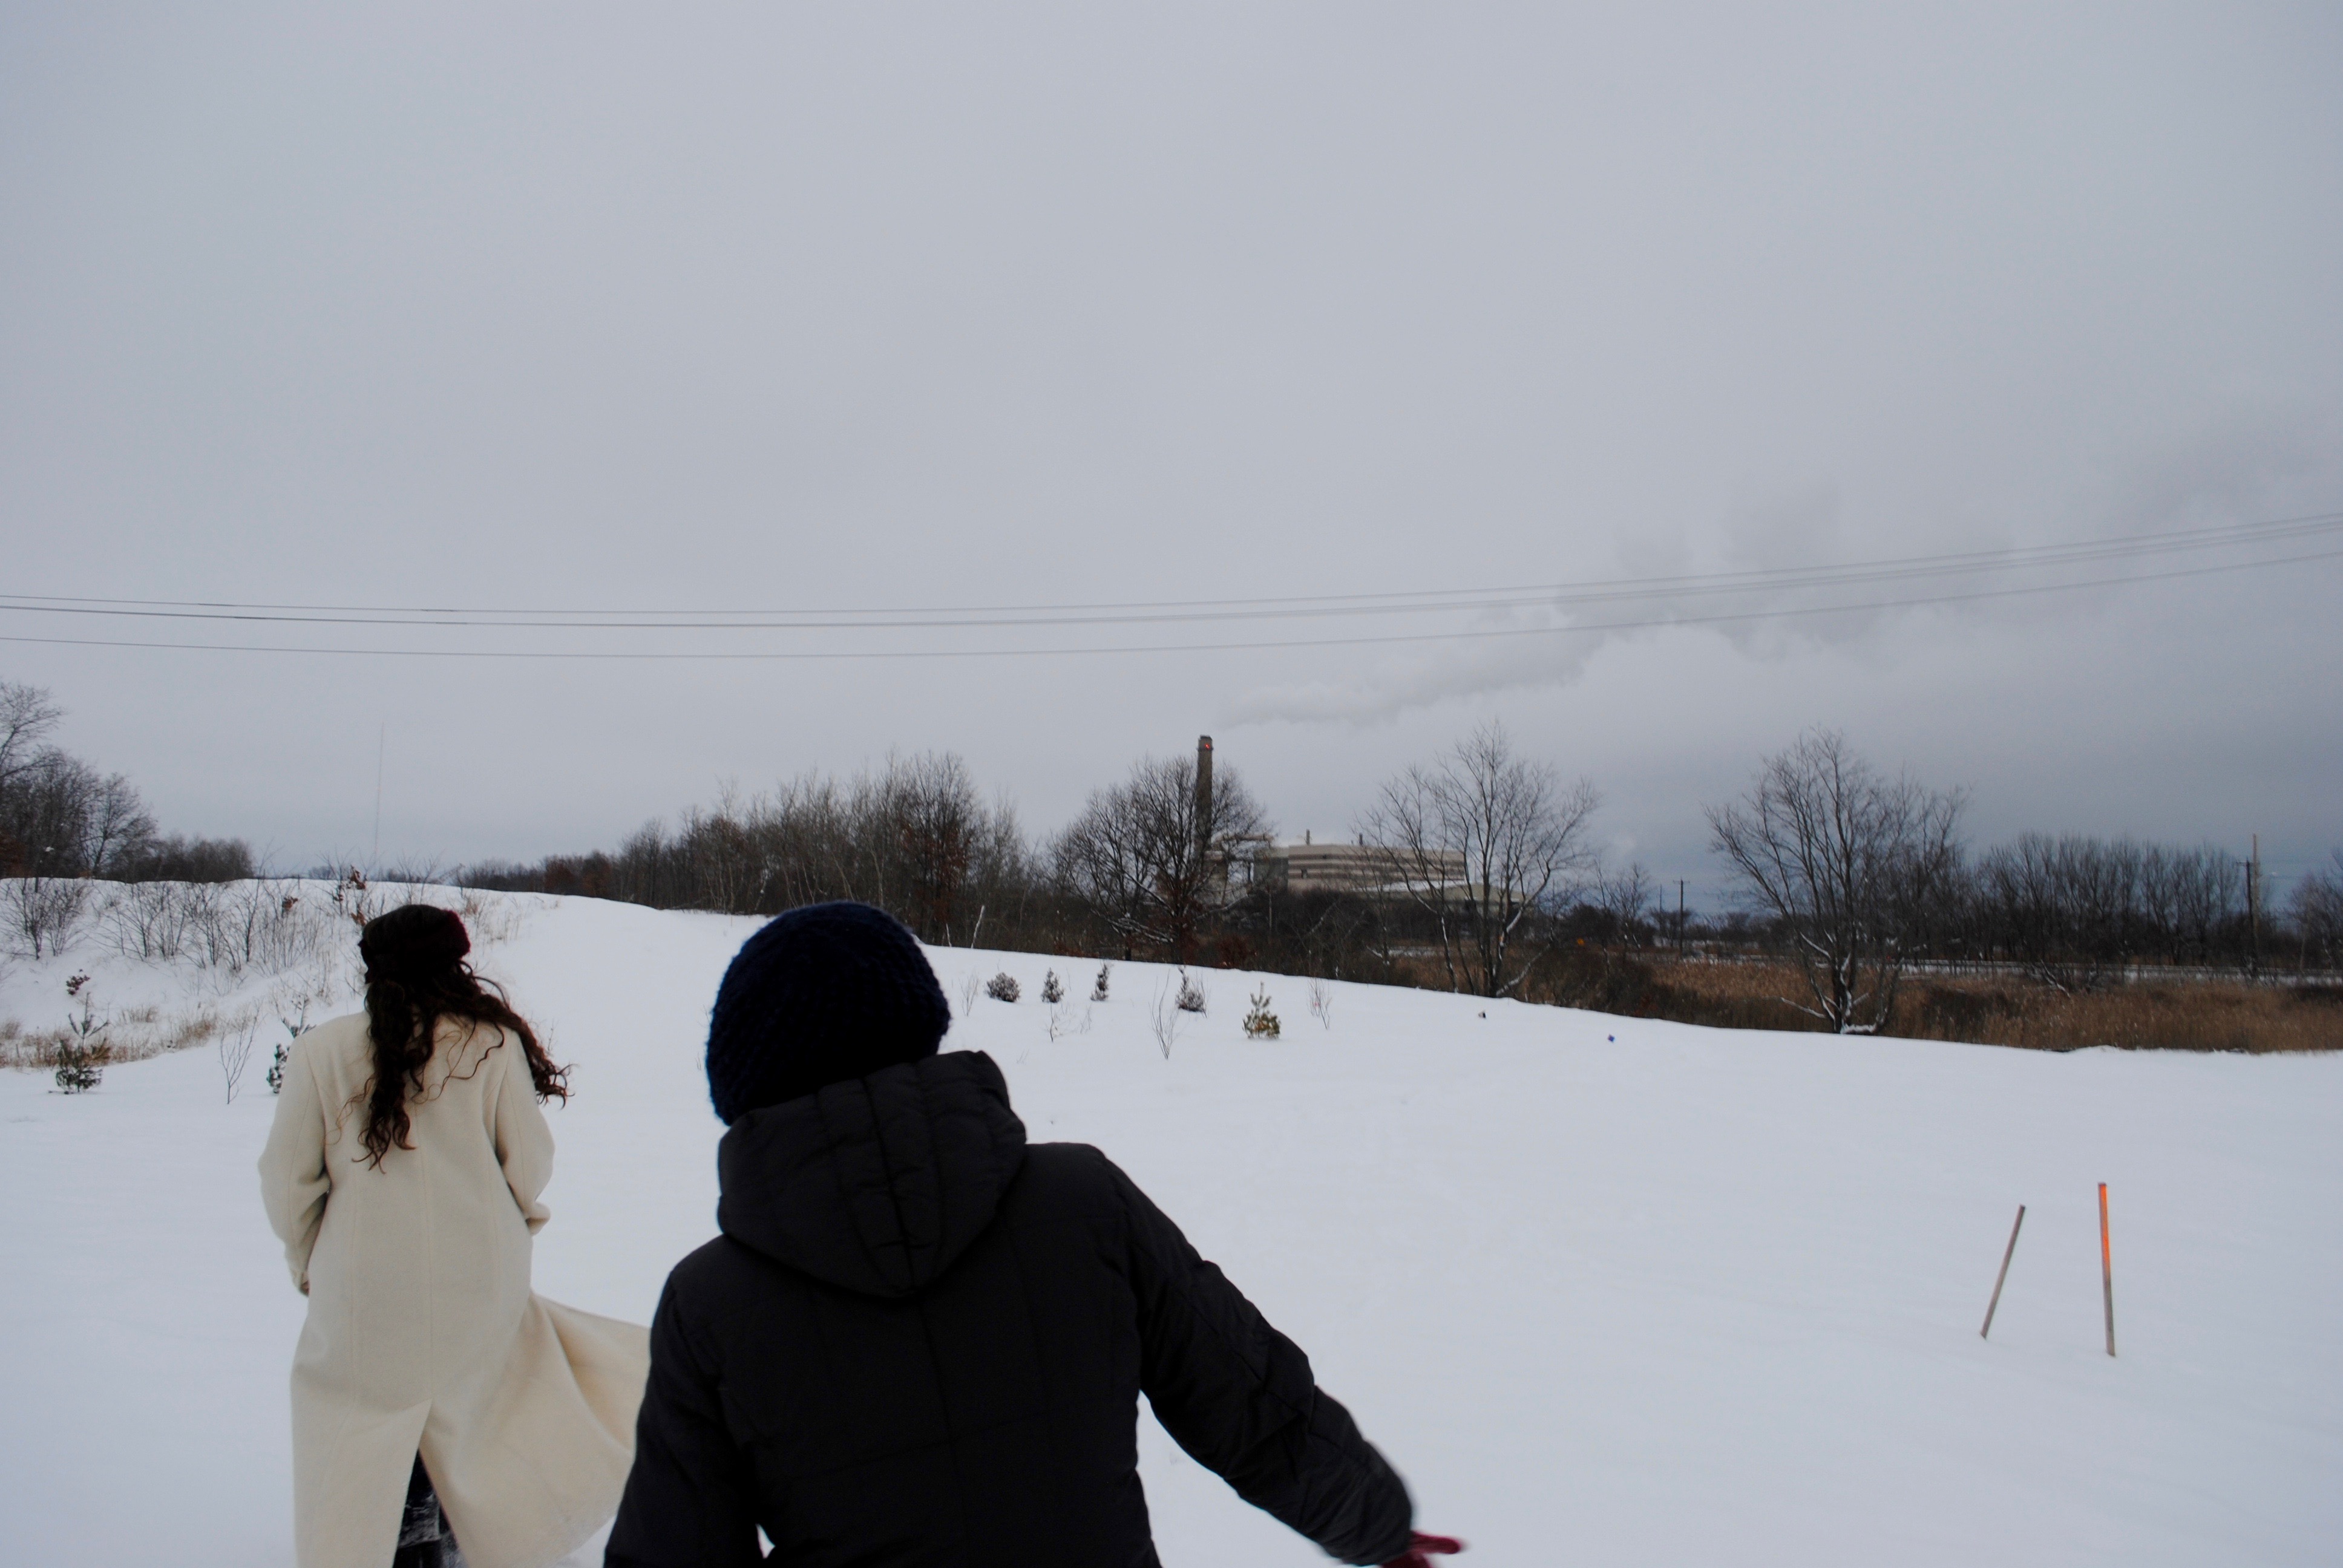 two women walk with the incinerator in the background